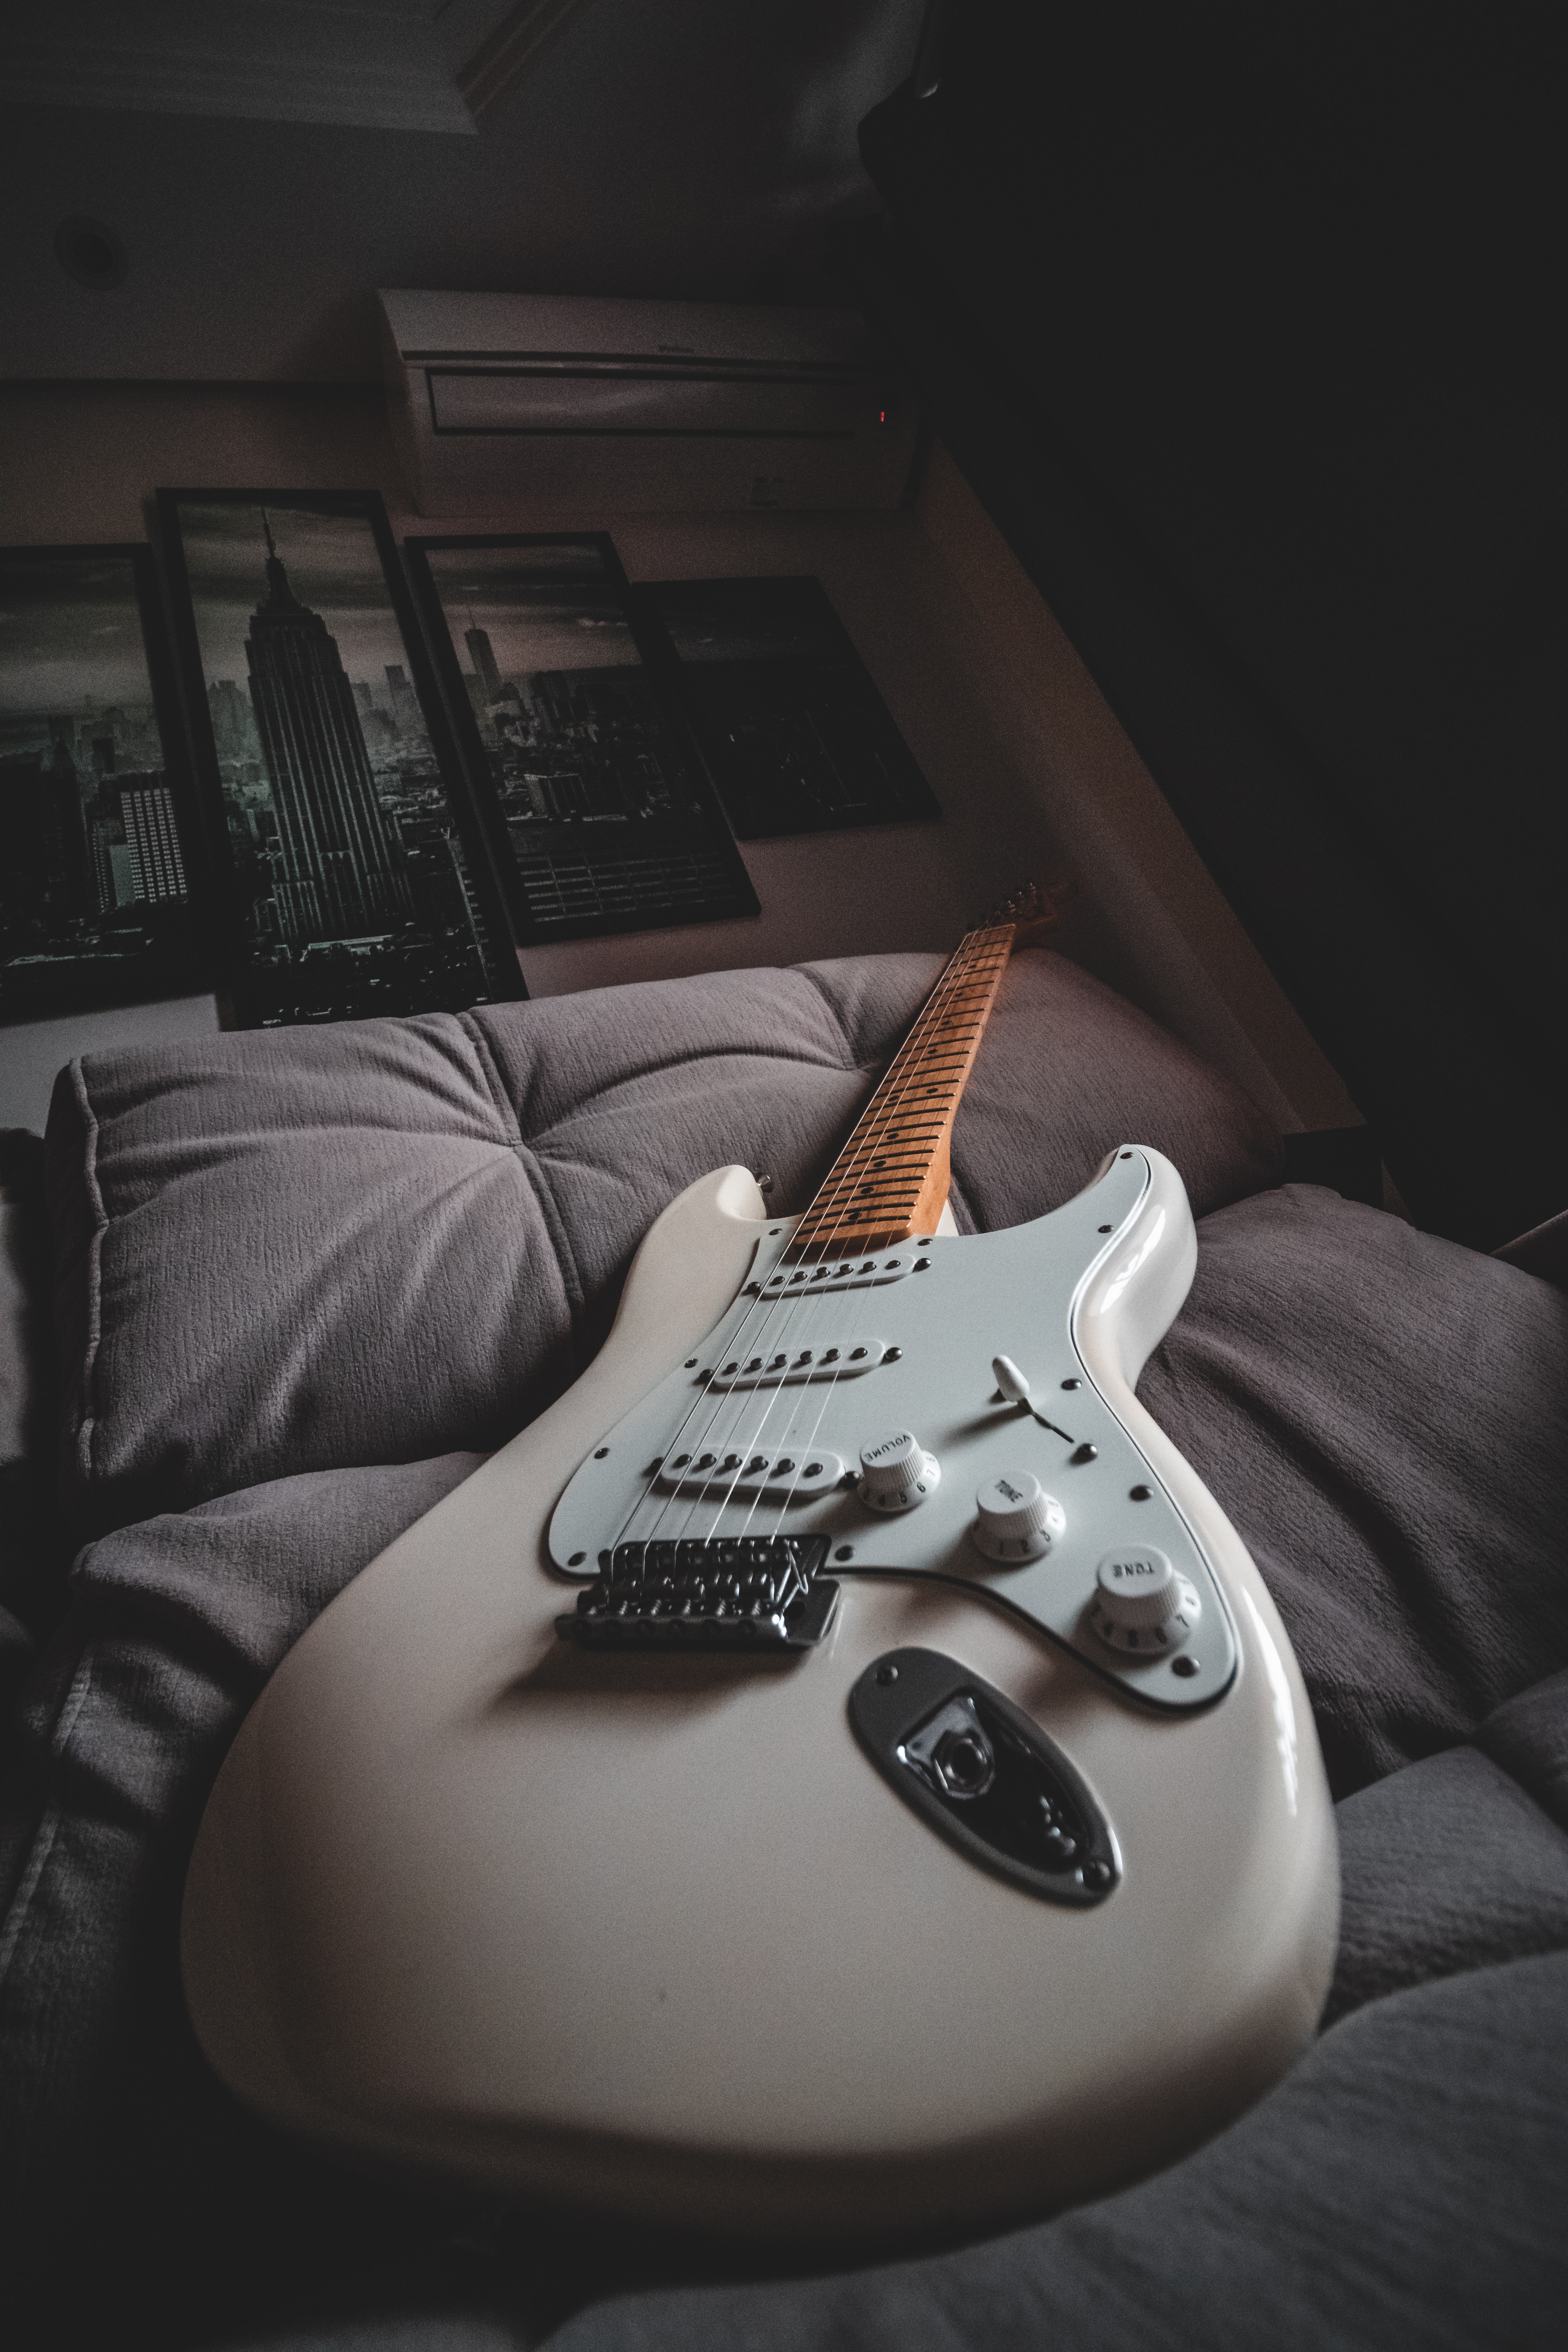 74452 download wallpaper music, white, guitar, musical instrument, electric guitar screensavers and pictures for free